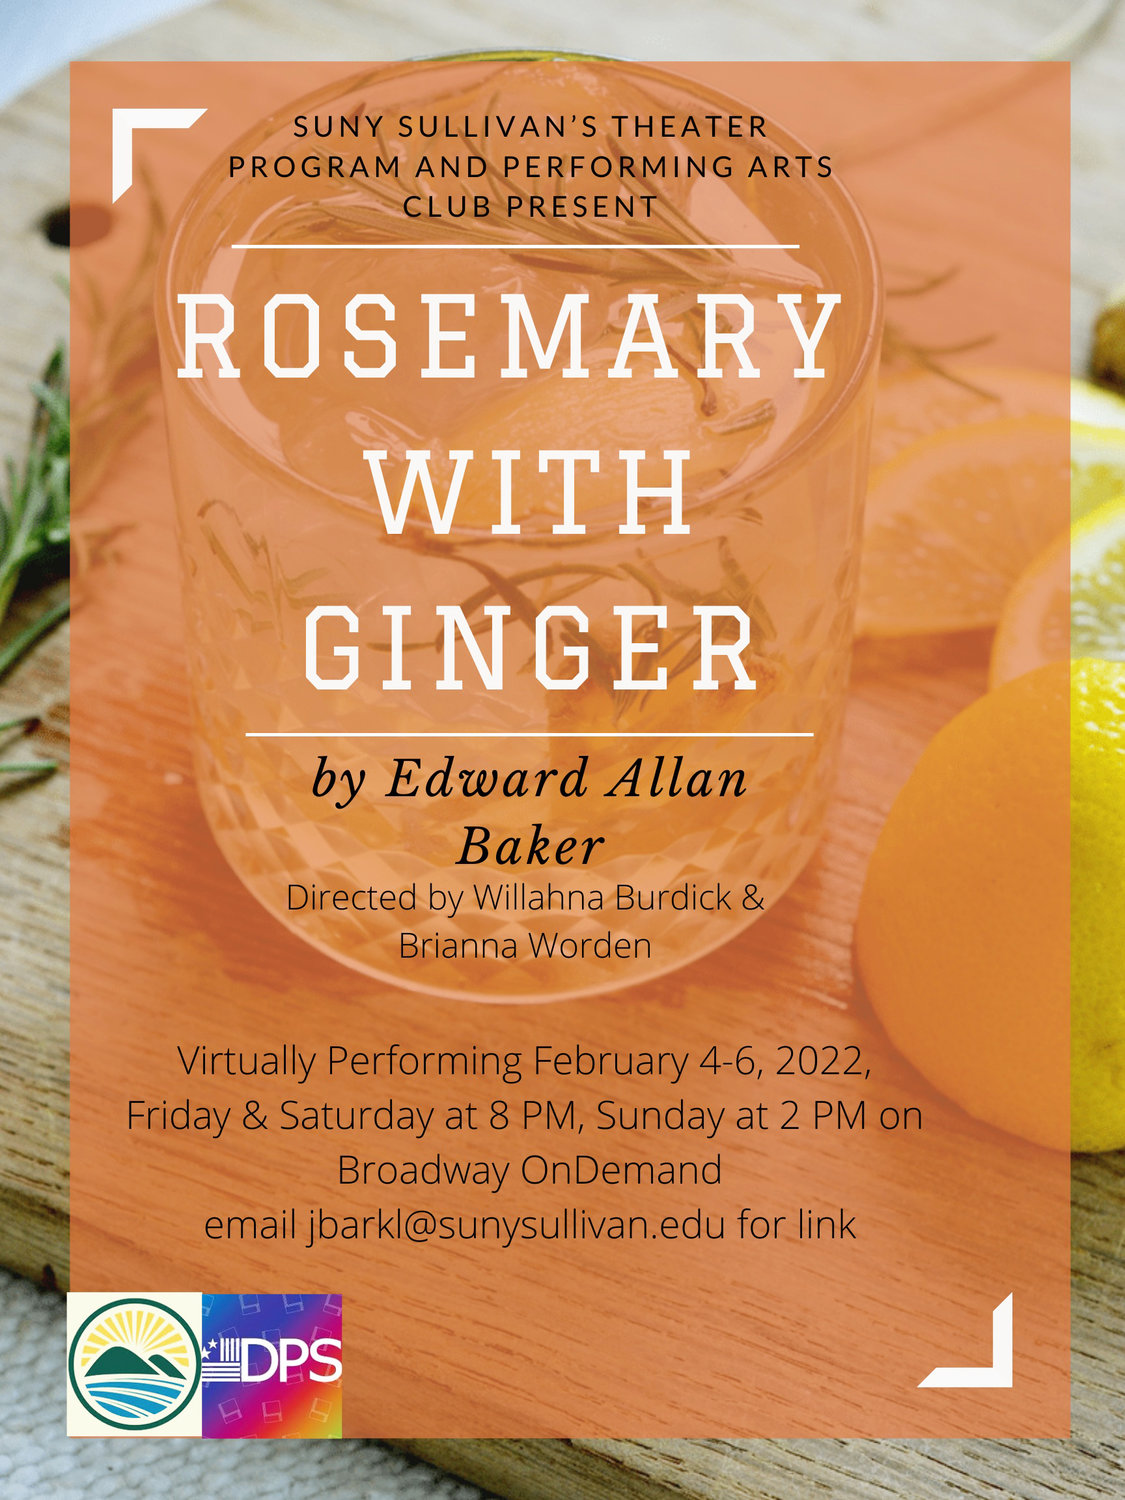 Rosemary with Ginger is one of several plays in SUNY Sullivan’s 2021-22 theater season to investigate the circumstances of the historically marginalized disability community and attempt to foreground people whose stories have not been largely overlooked.